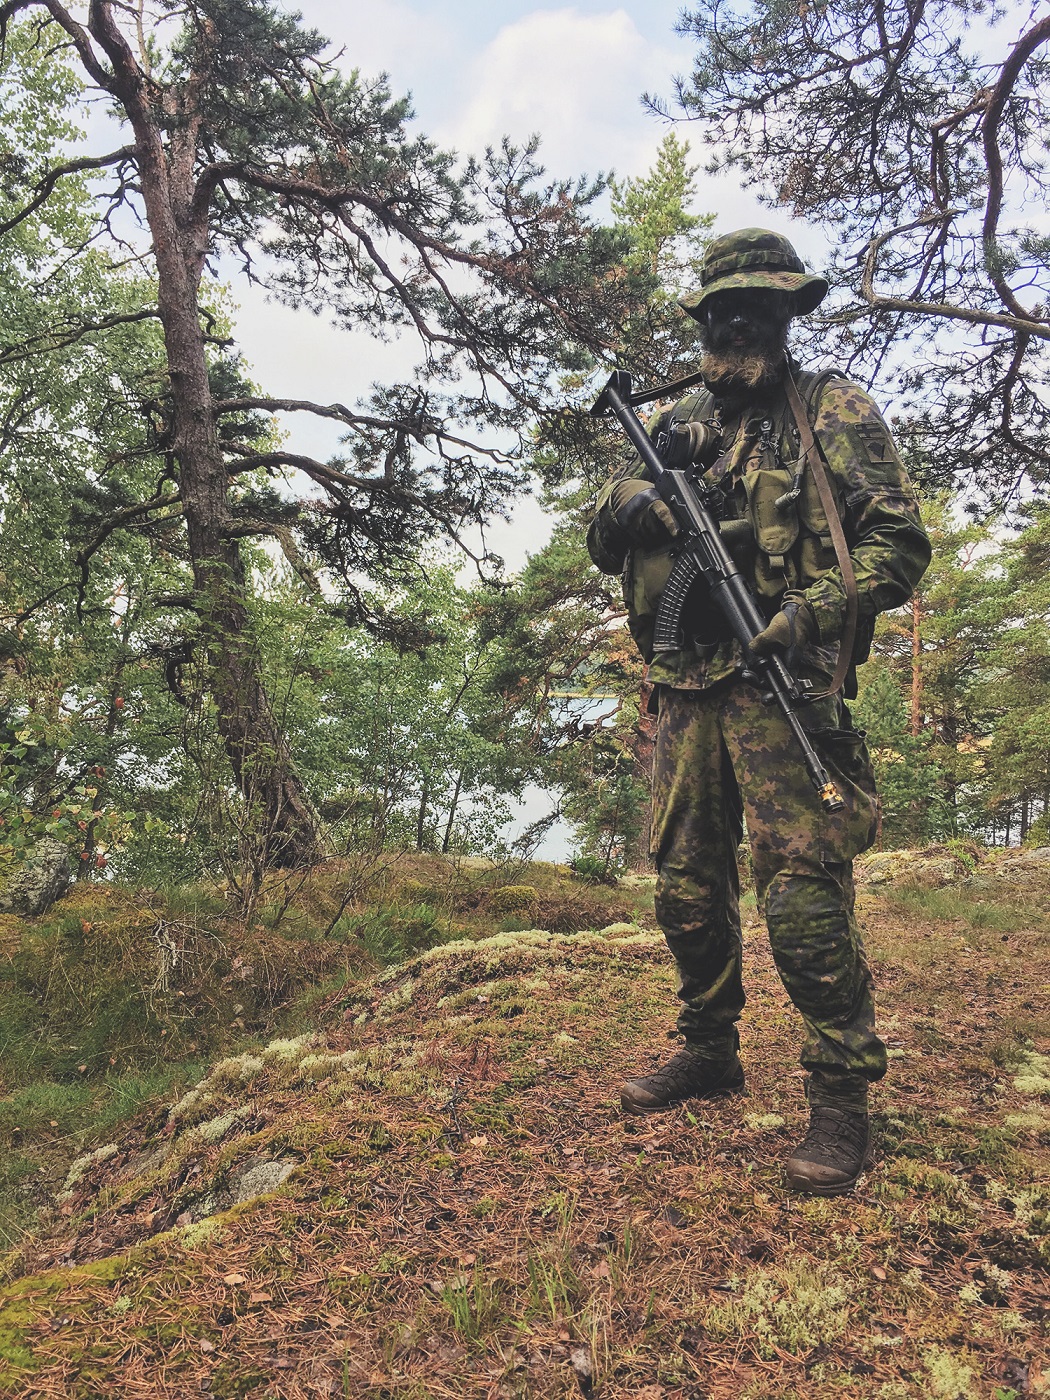 A soldier wearing camouflage clothing in the woods.